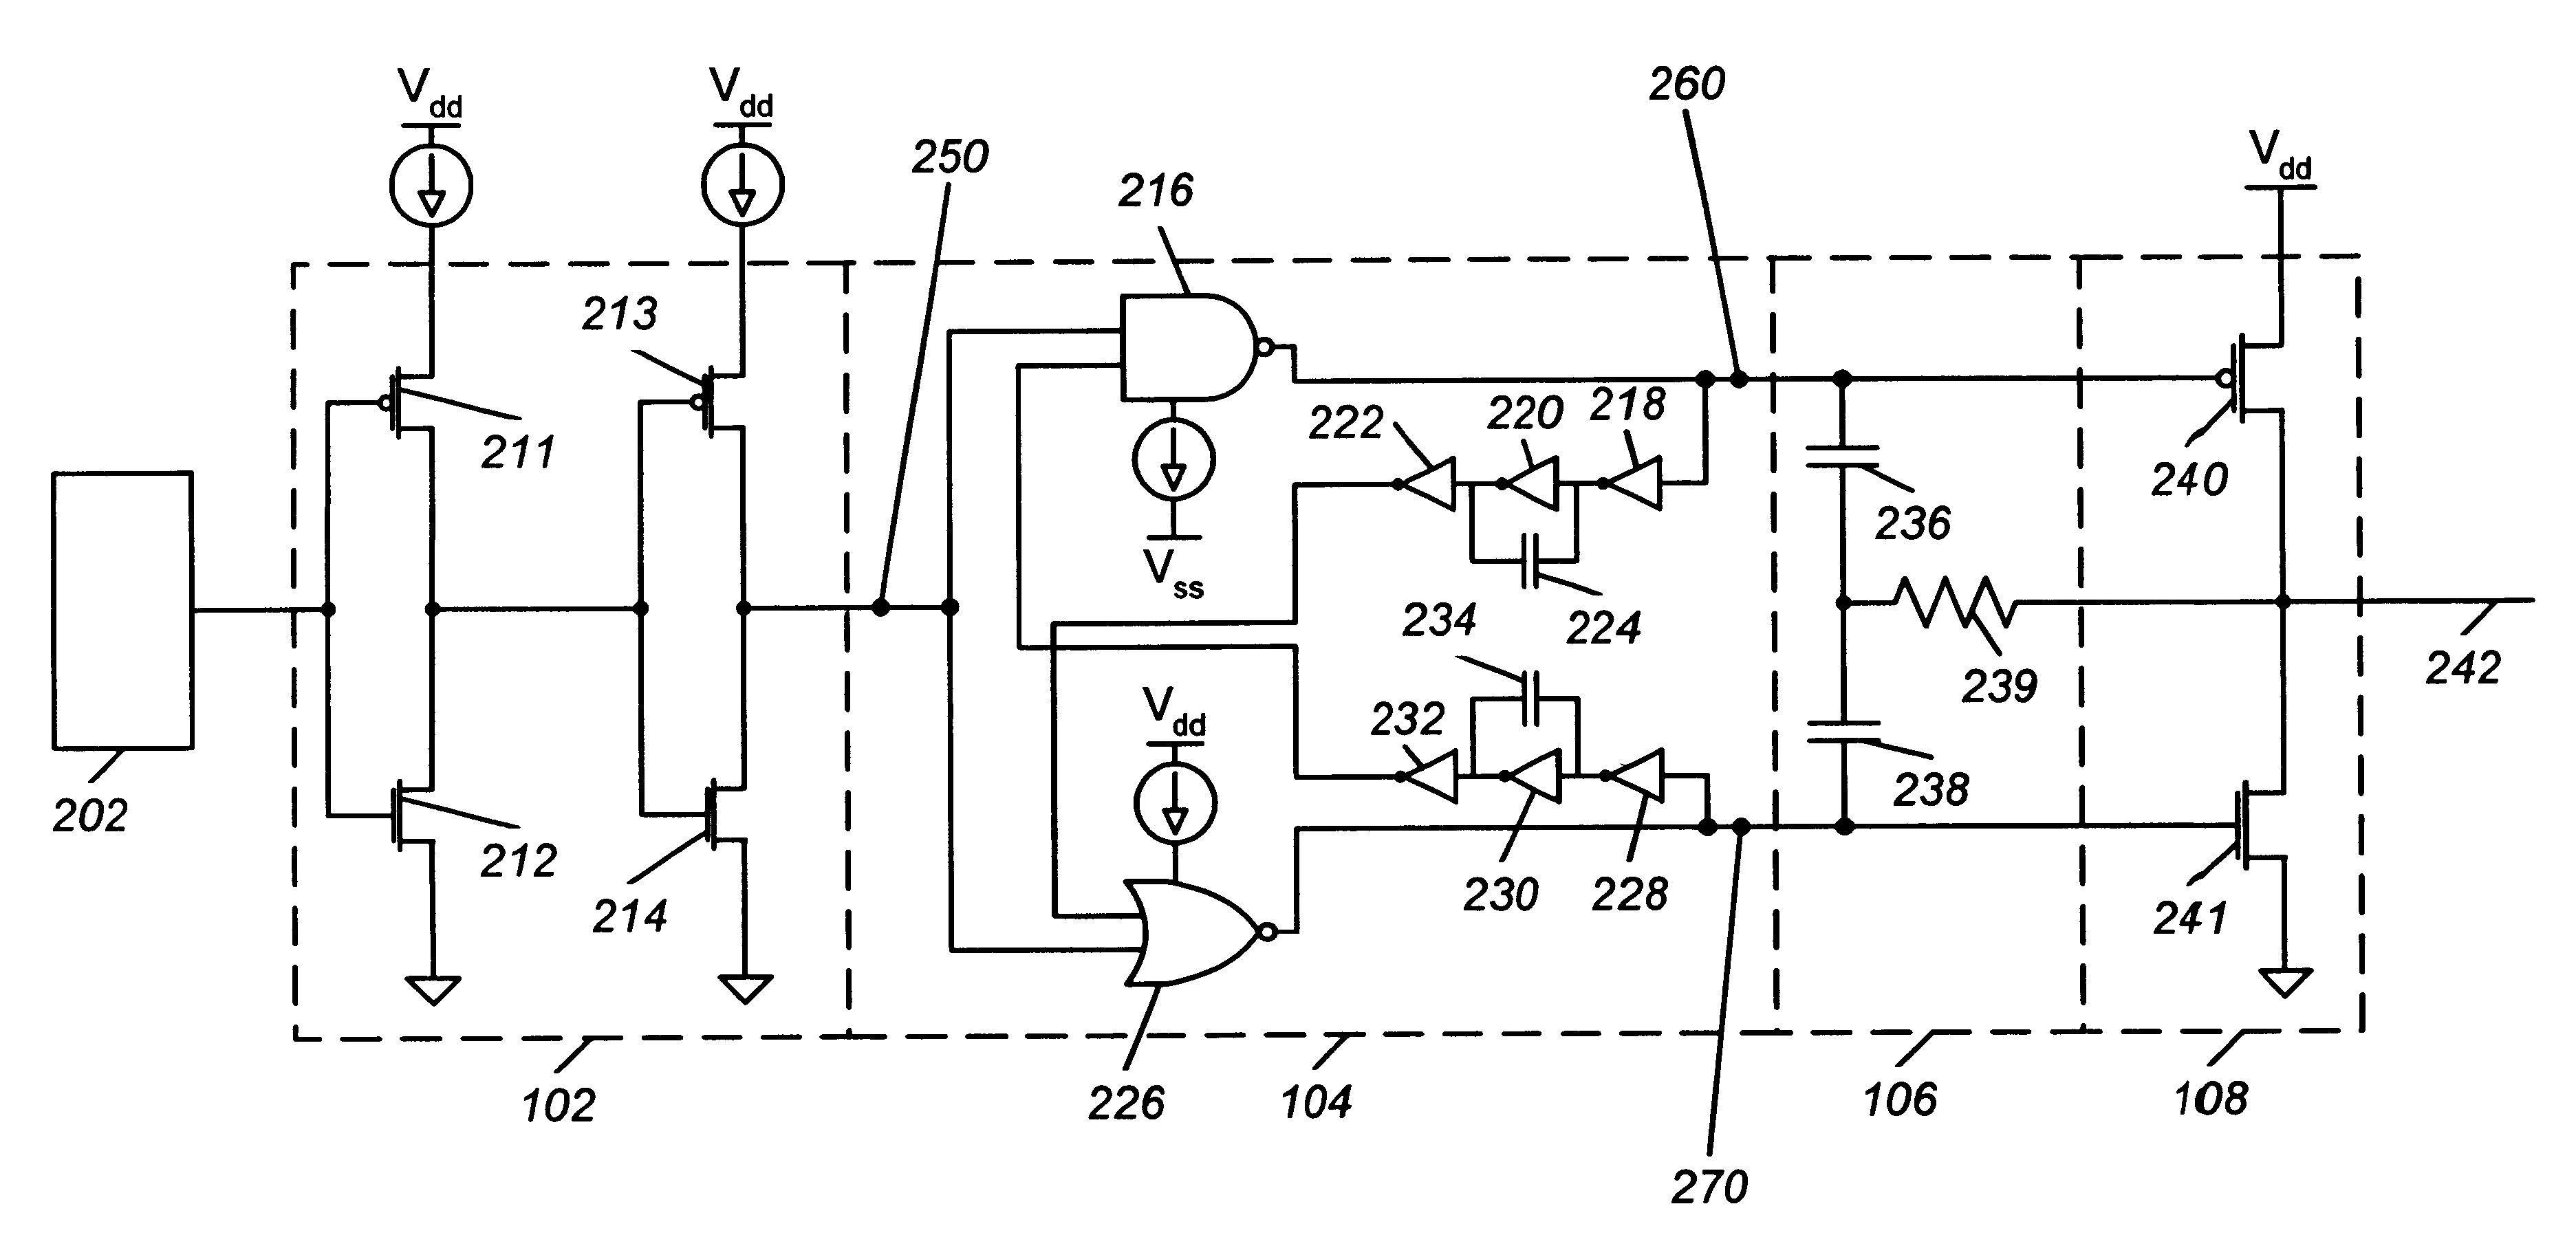 Low-power output controlled circuit